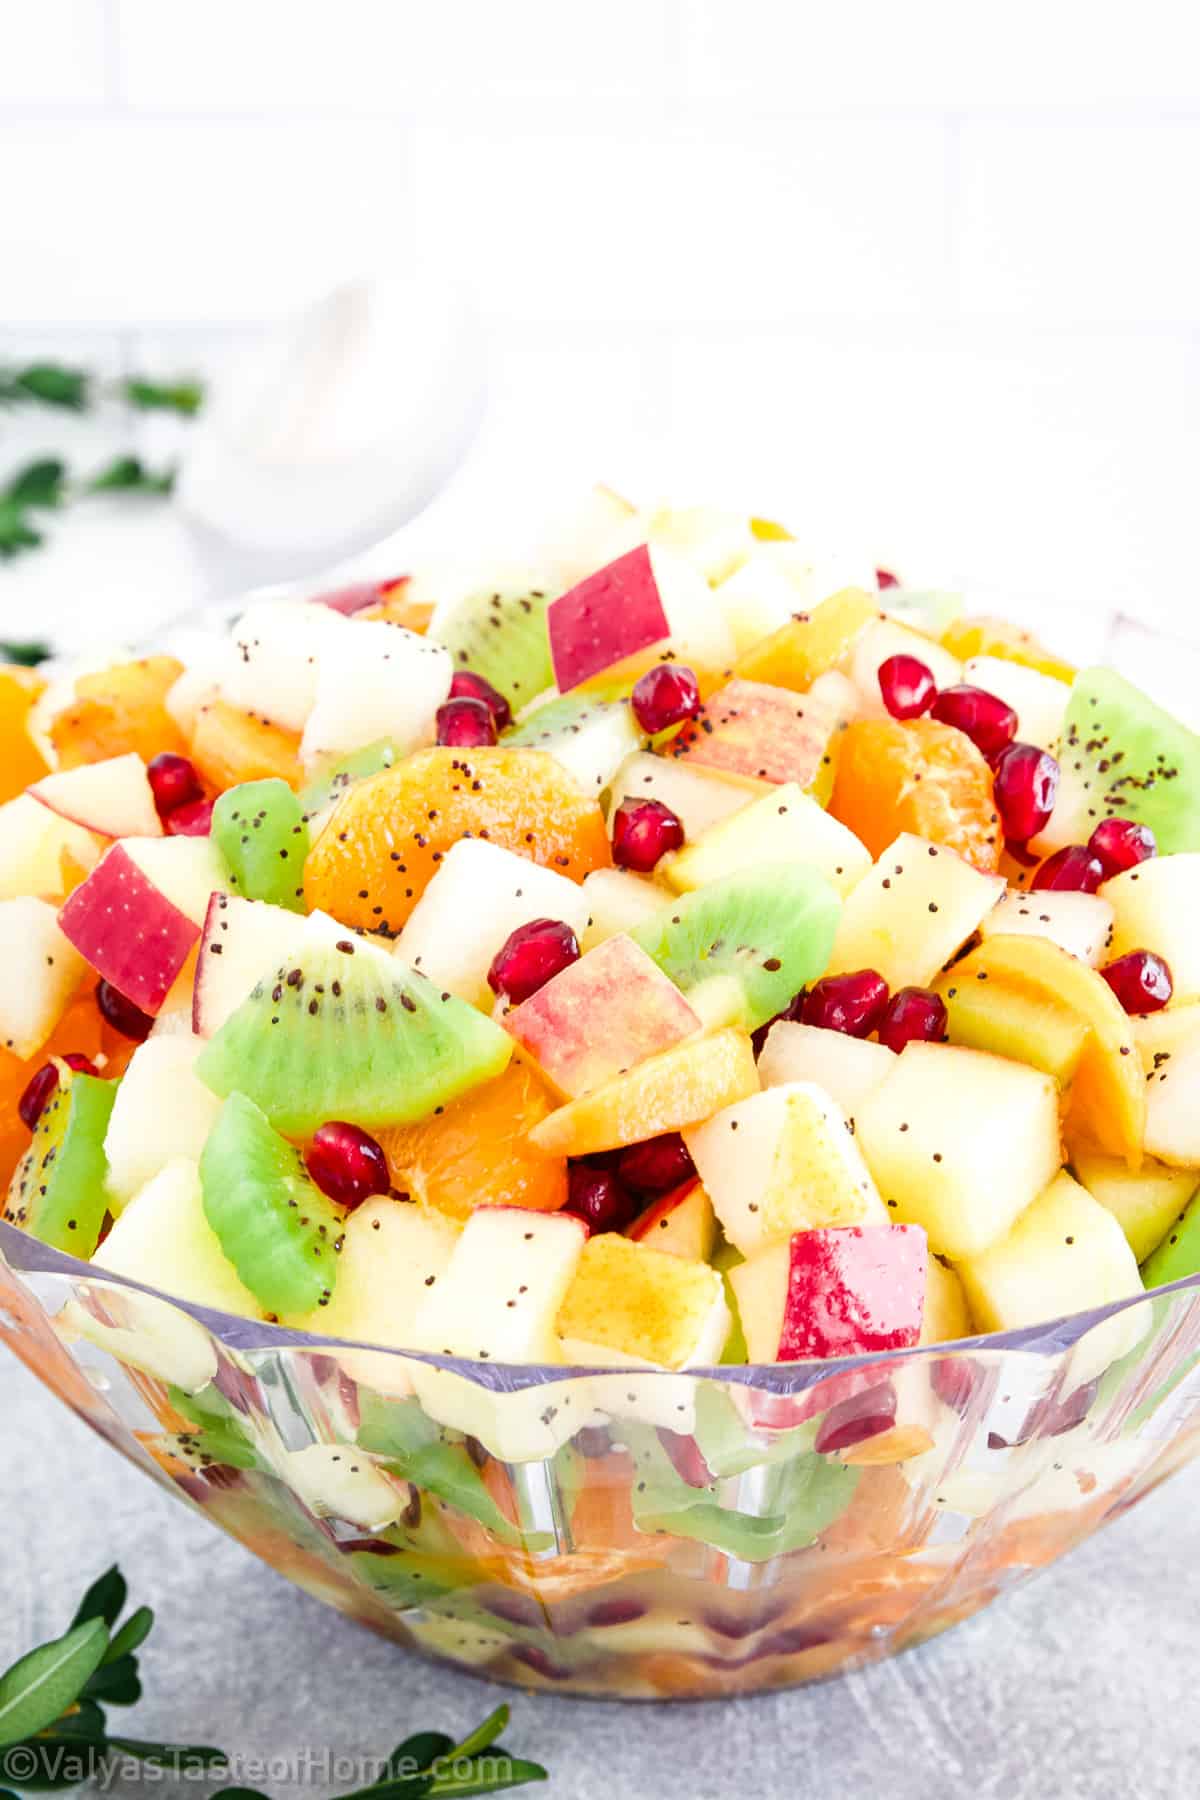 If you're a fruit lover, you're in for a treat with this winter fruit salad! It features a fantastic mix of fresh fruits, all dressed up in a tangy-sweet dressing made from orange, lemon, raw honey, and poppy seeds.